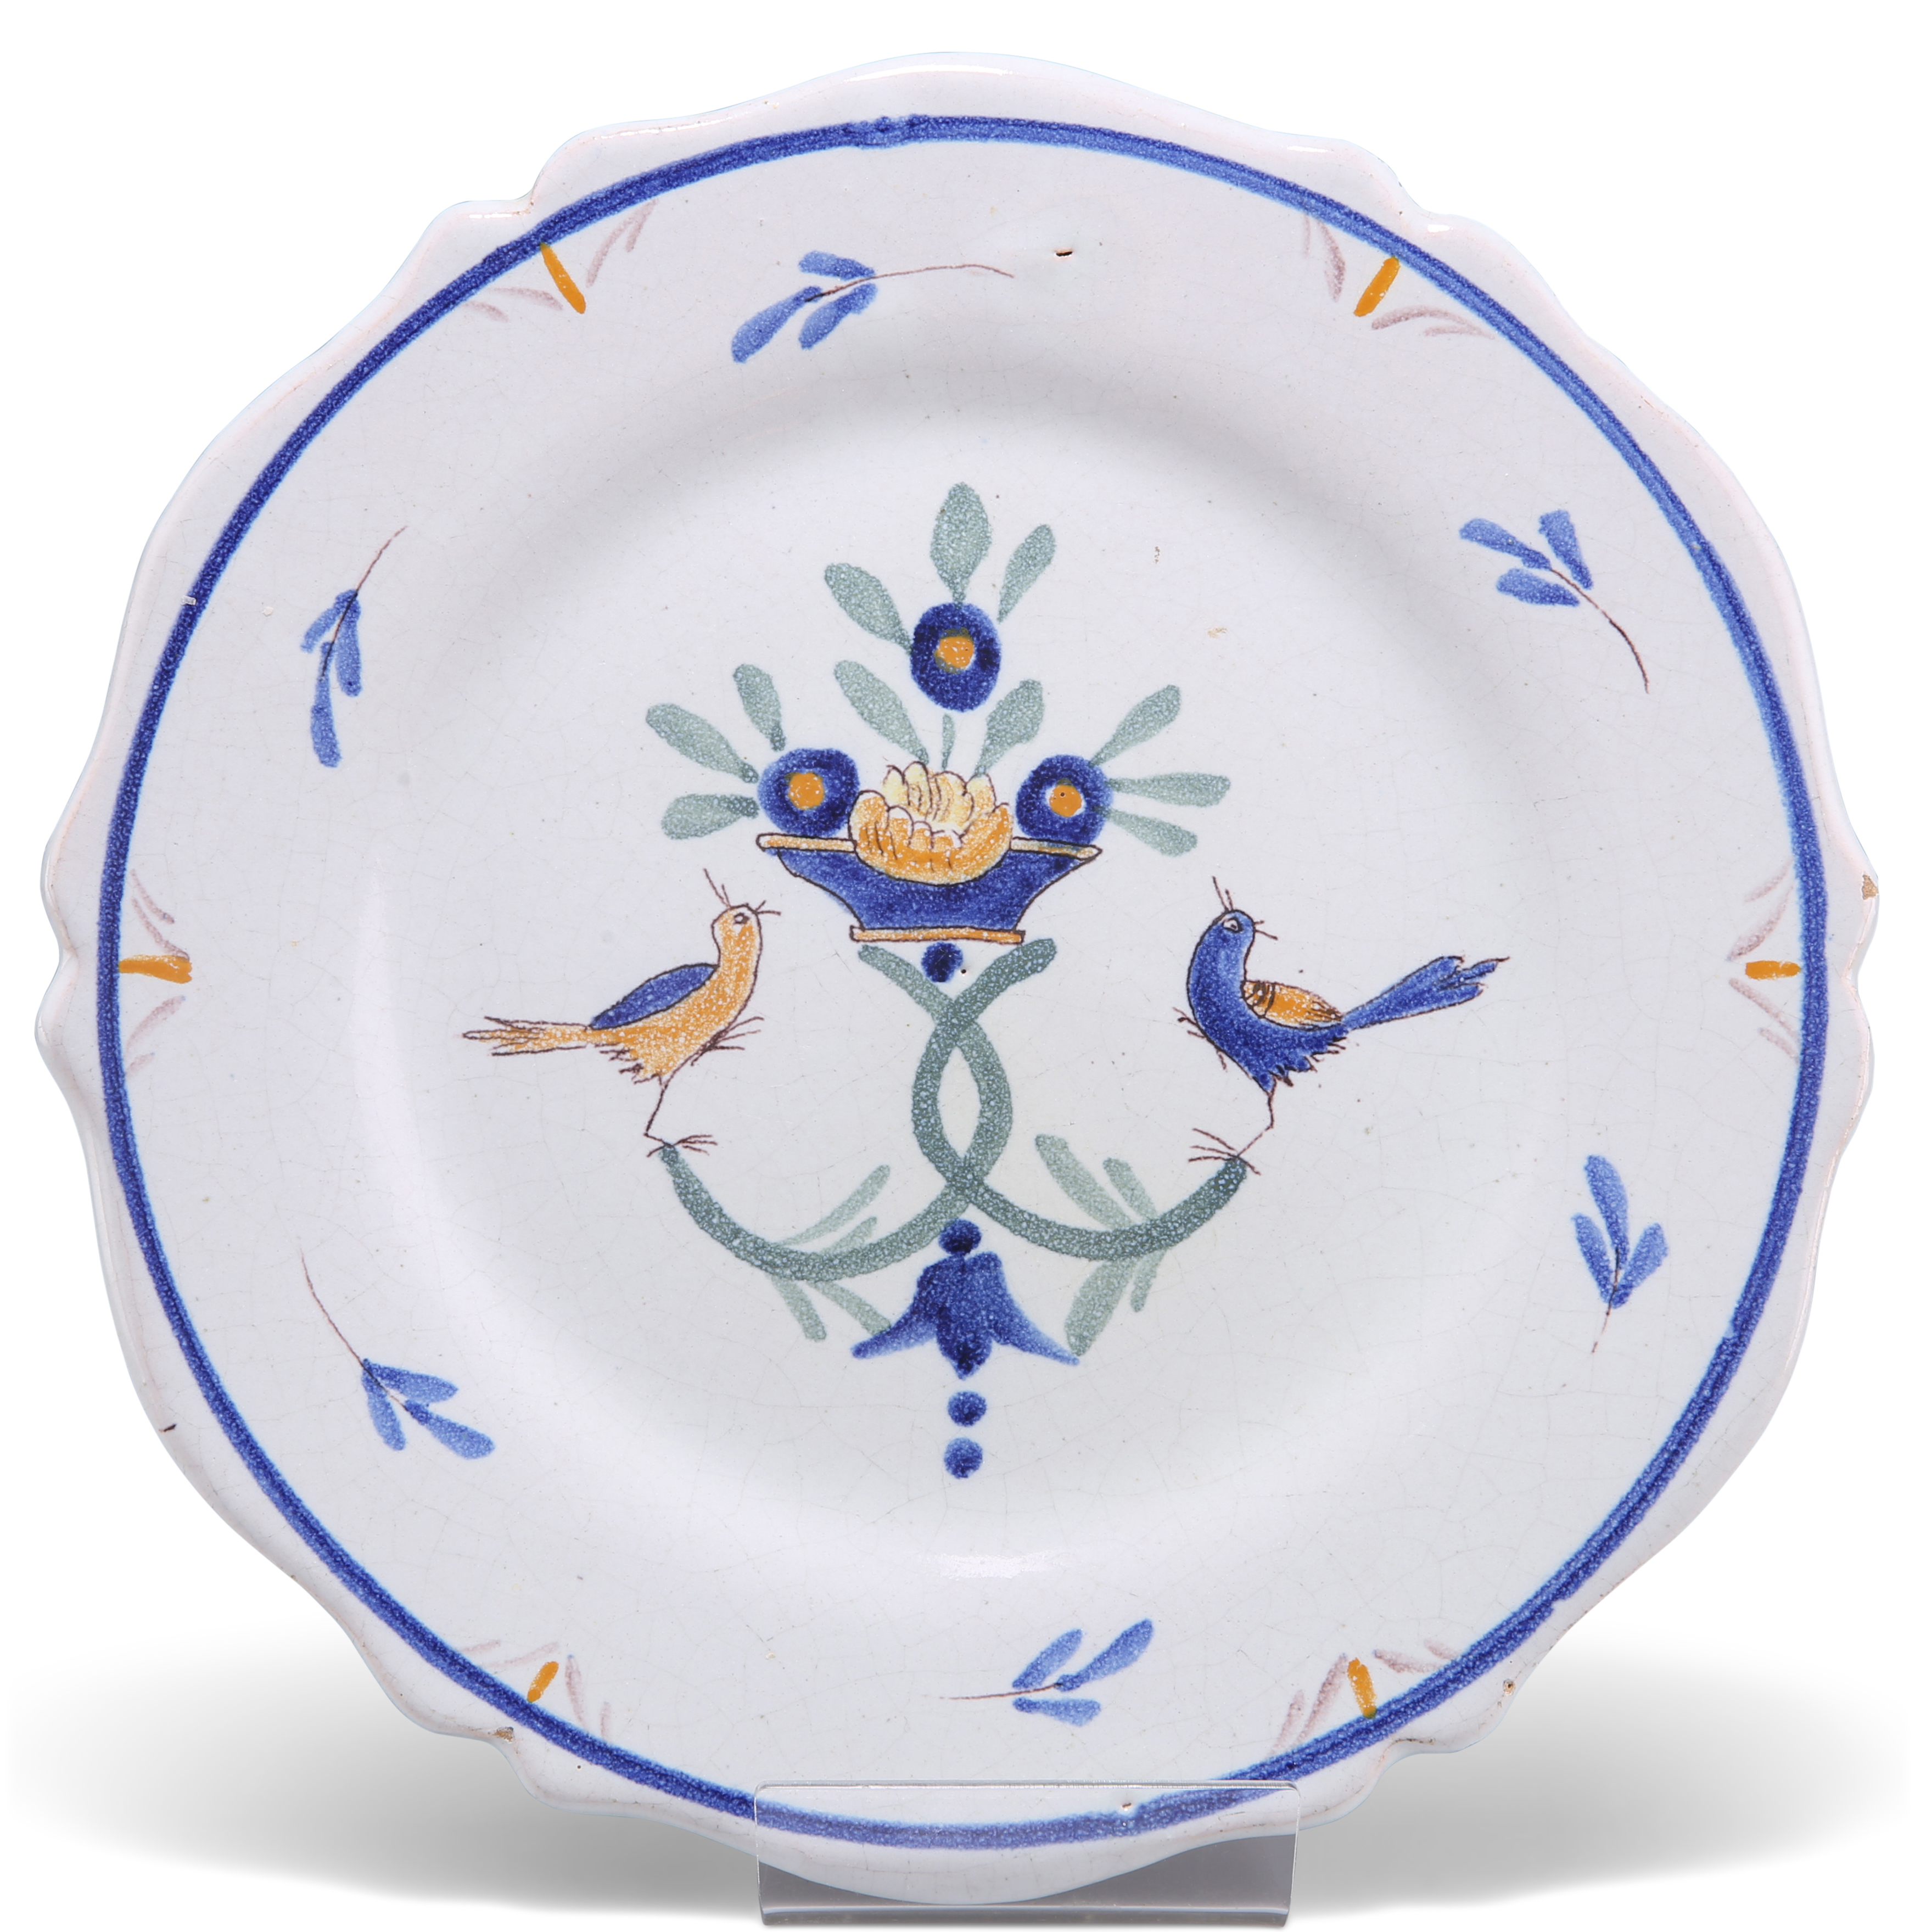 A FRENCH FAÏENCE PLATE